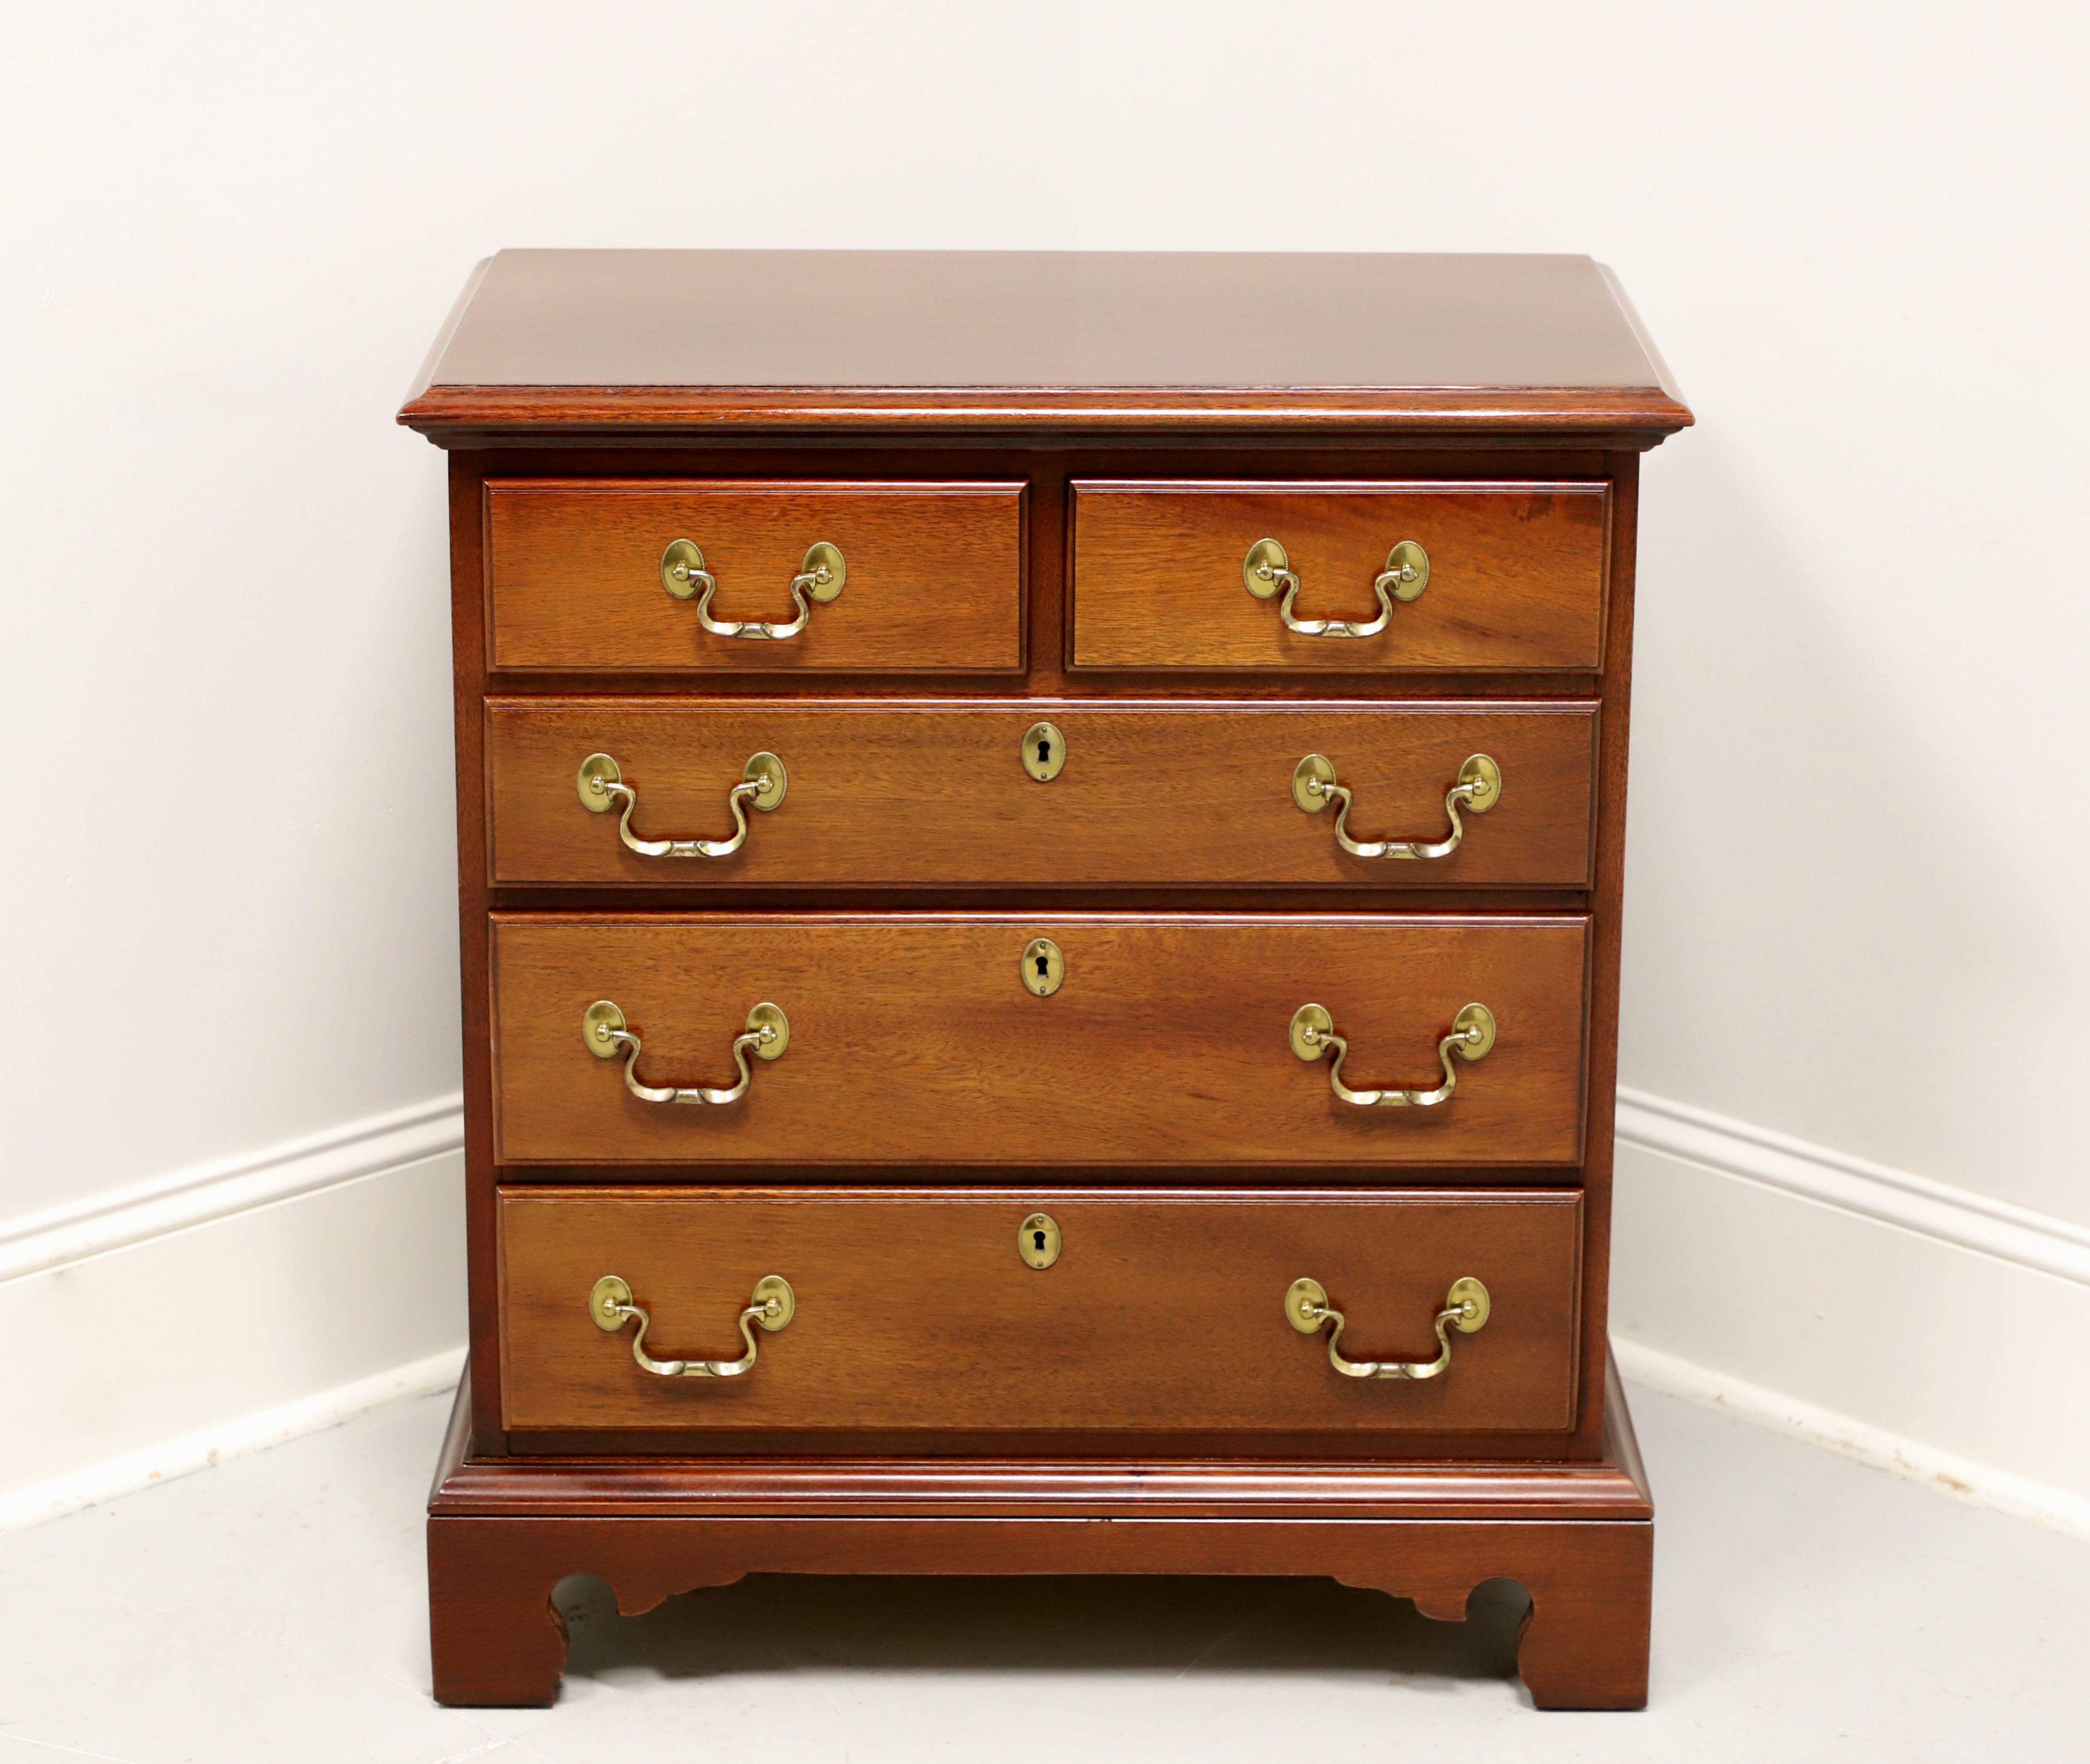 A Chippendale style bedside chest by Link-Taylor, from their Heirloom Gallery, the Planters. Solid mahogany with brass hardware, ogee edge to the top, side handles, and bracket feet. Two over three drawers of dovetail construction, with three lower